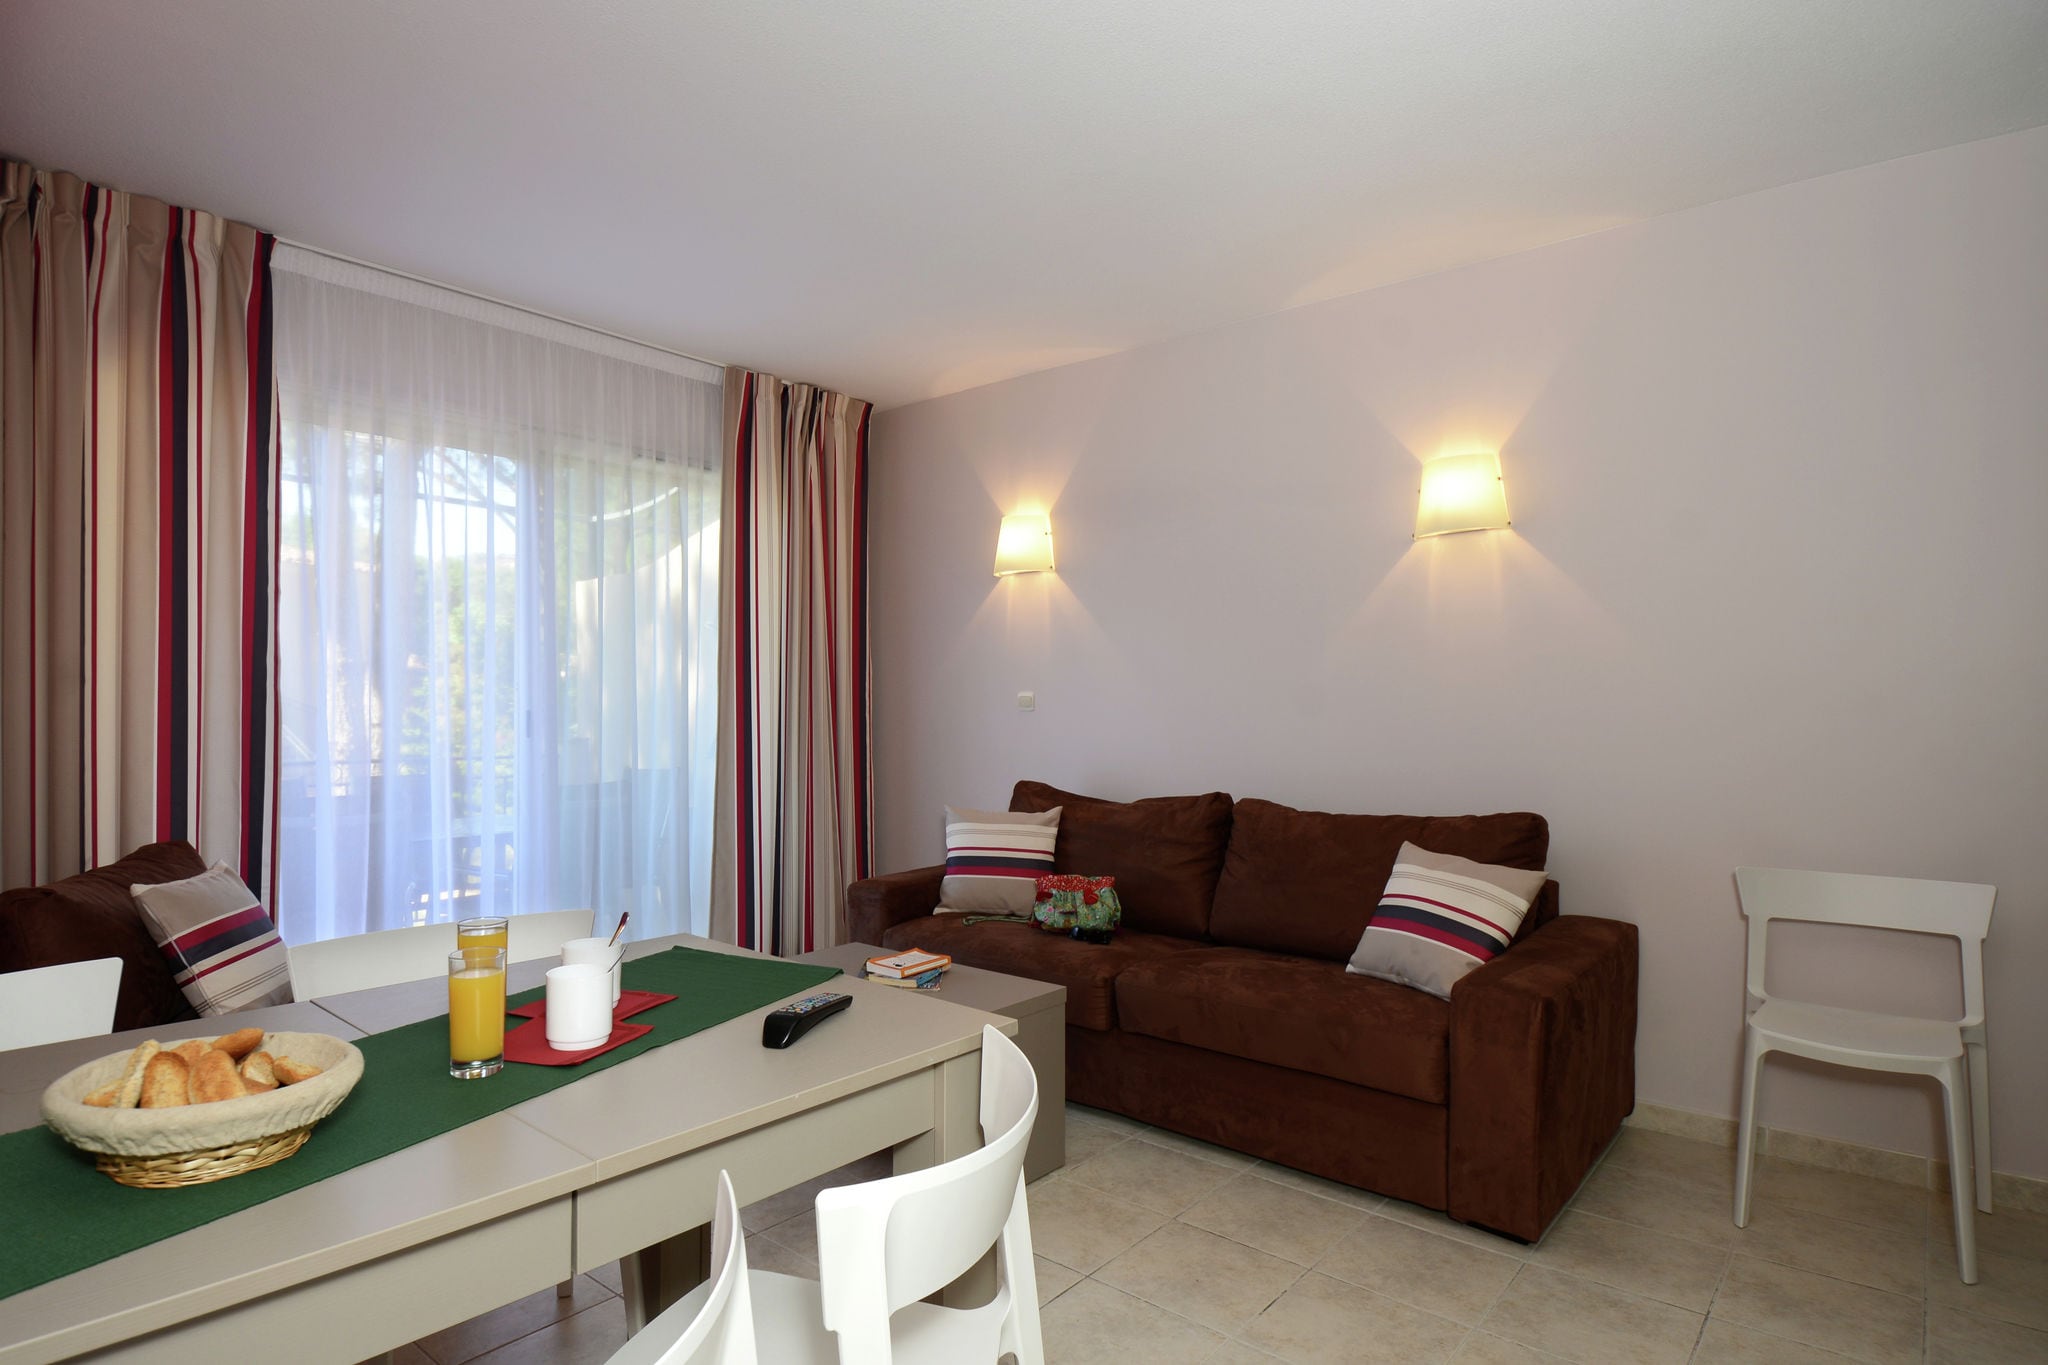 Comfortable apartment with dishwasher and AC, beach at 300 m